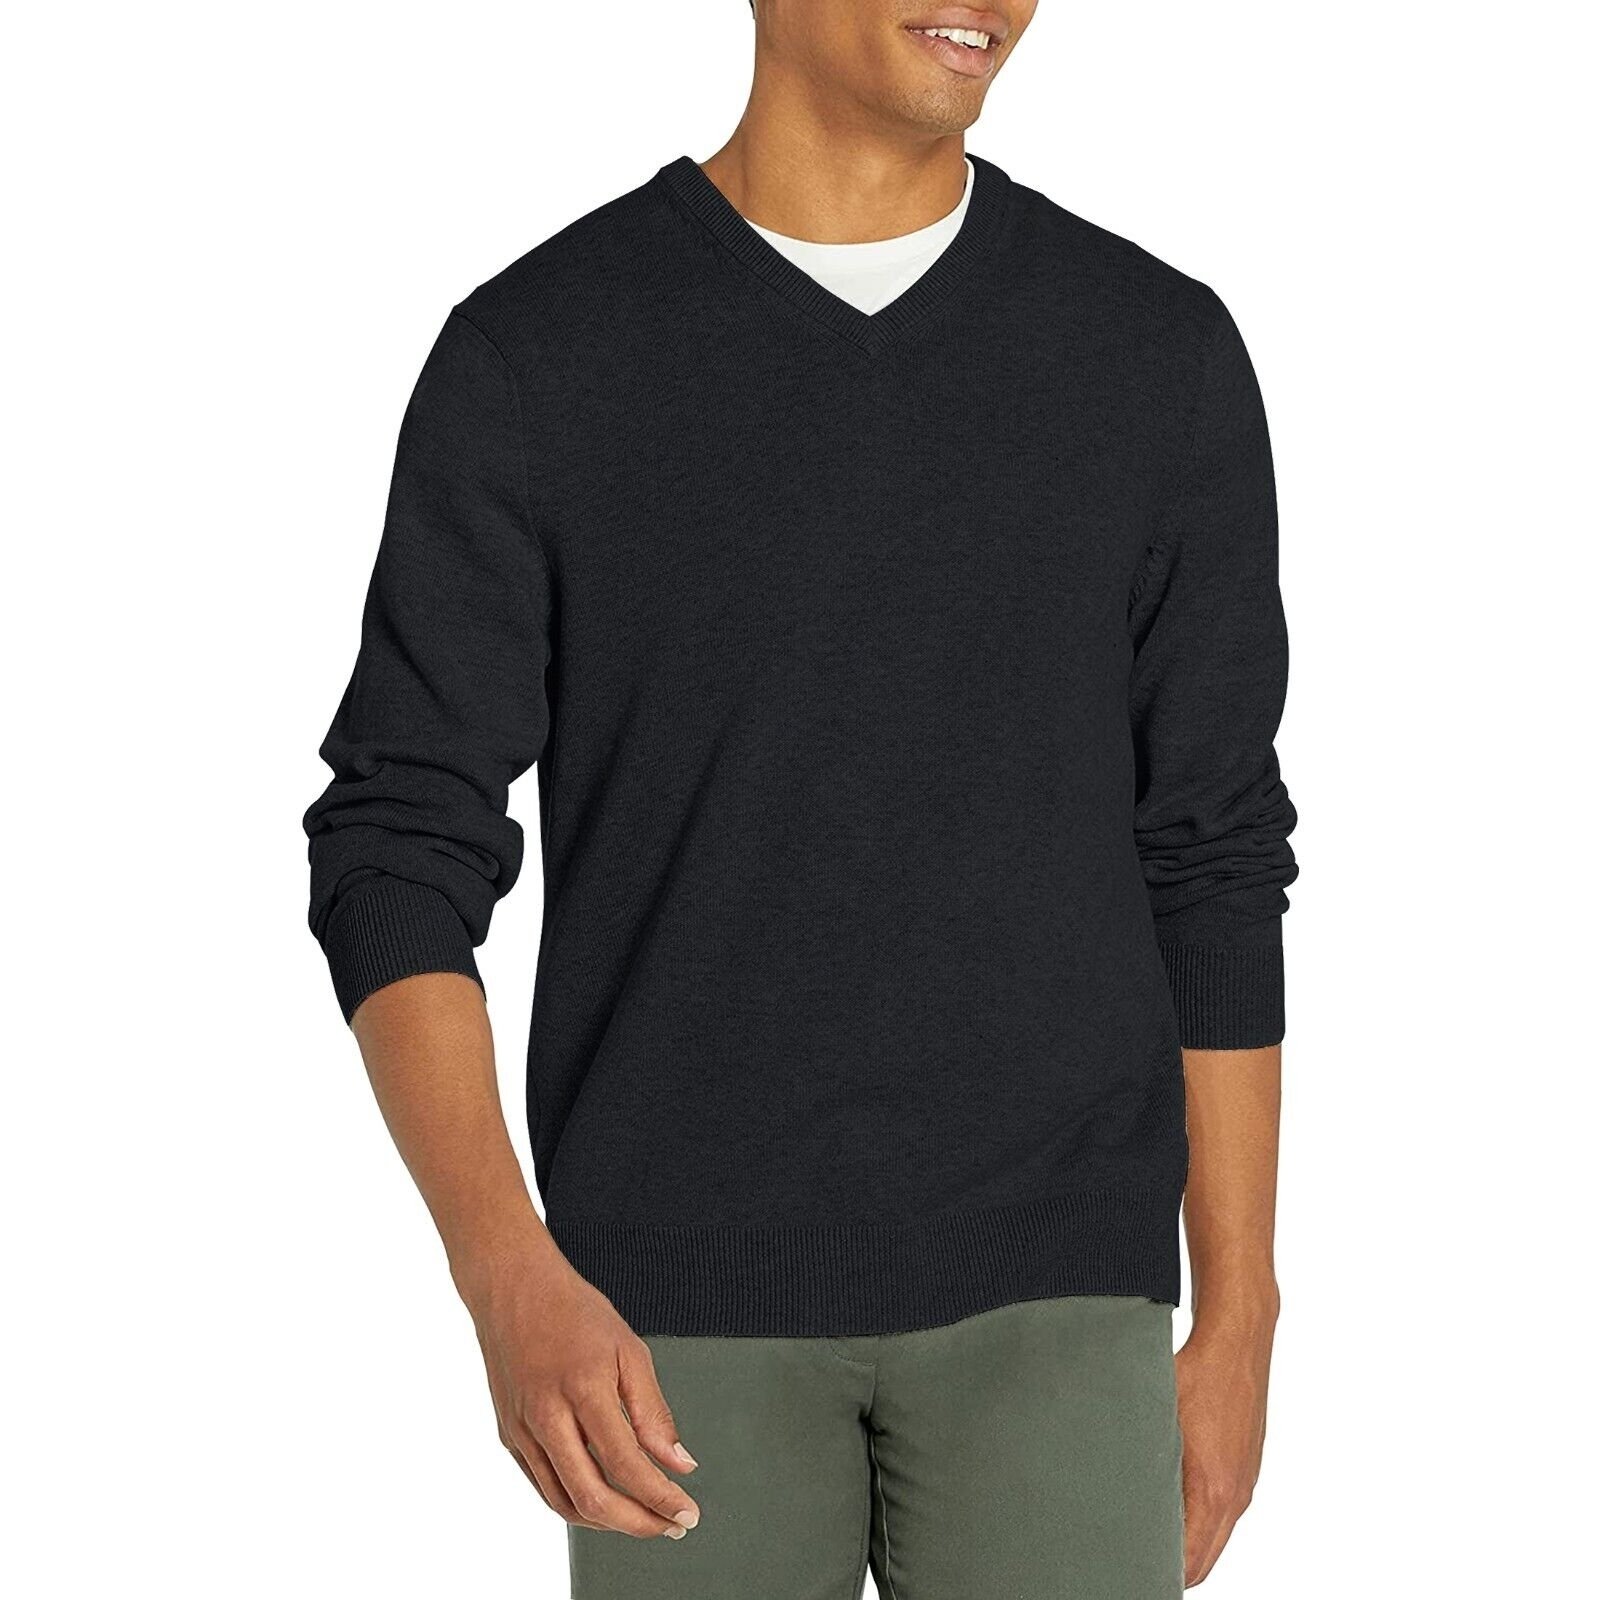 Men's Casual Ultra-Soft Slim Fit Warm Knit Pullover V-Neck Sweater For Winter - Grey, X-Large